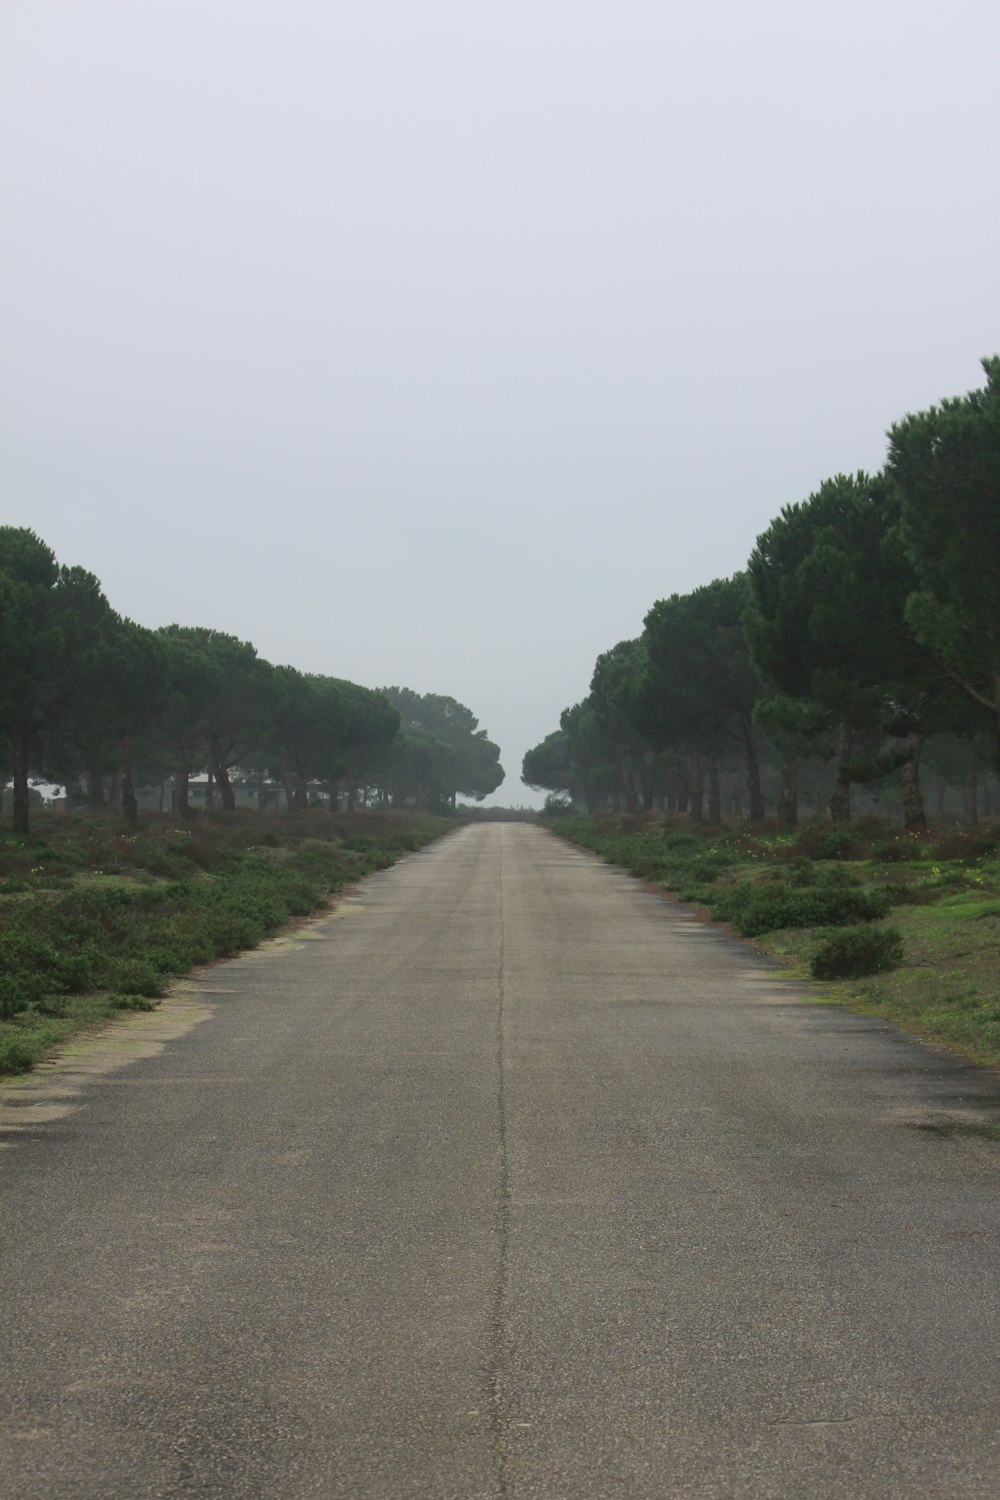 an empty road with trees on both sides